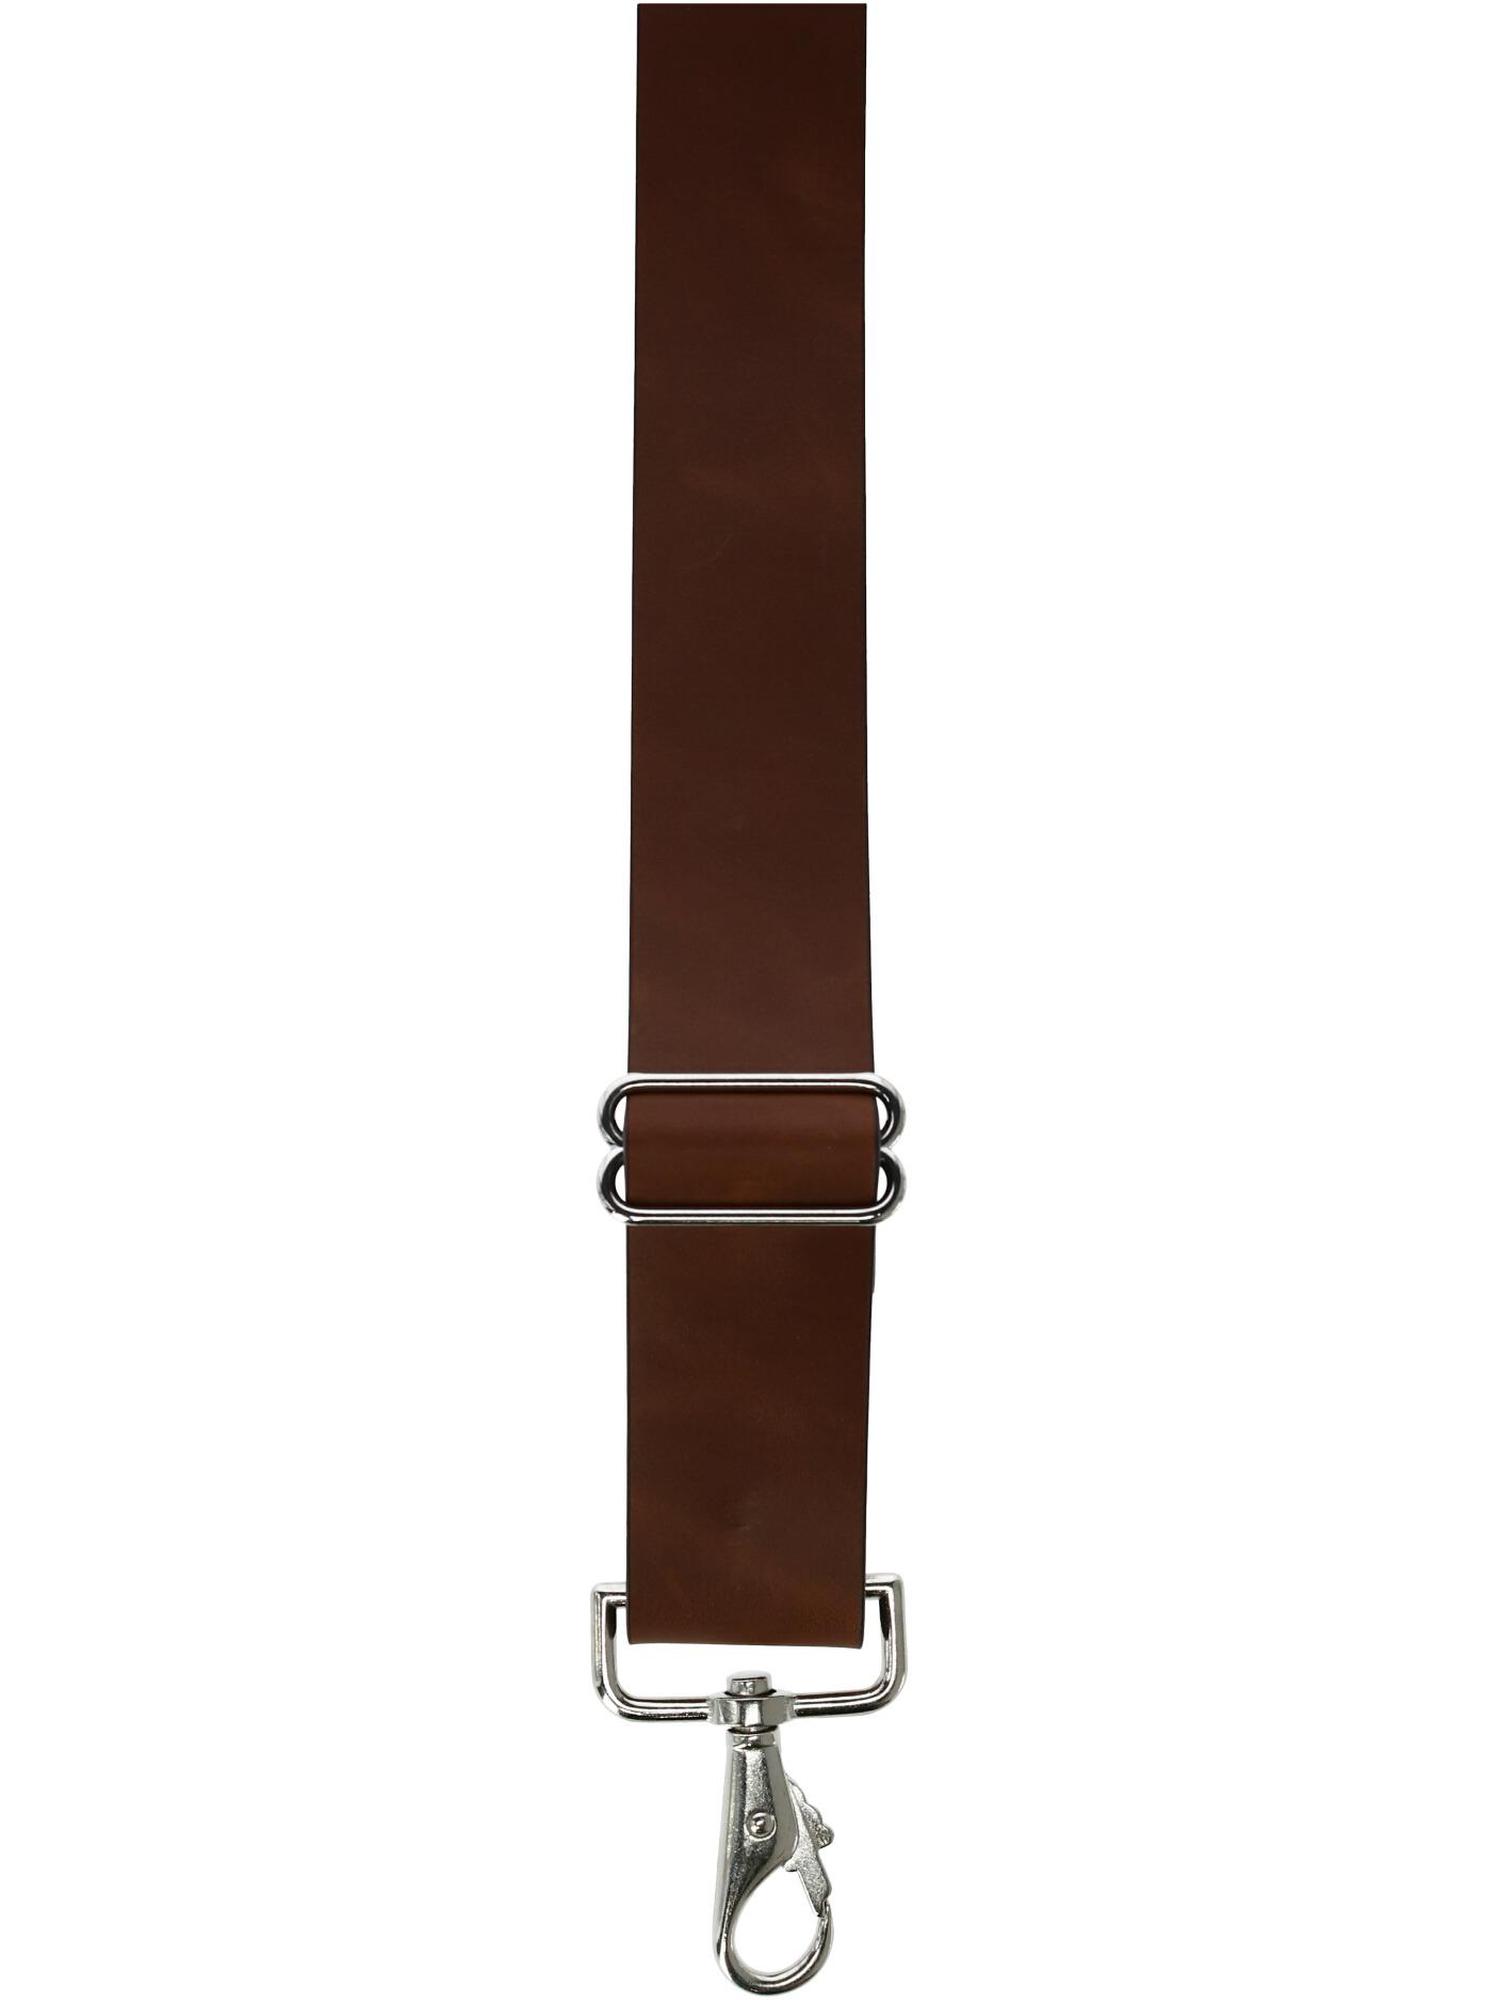 CTM  Wide Leather Suspenders with Swivel Hook Ends (Men Big & Tall) - image 4 of 4